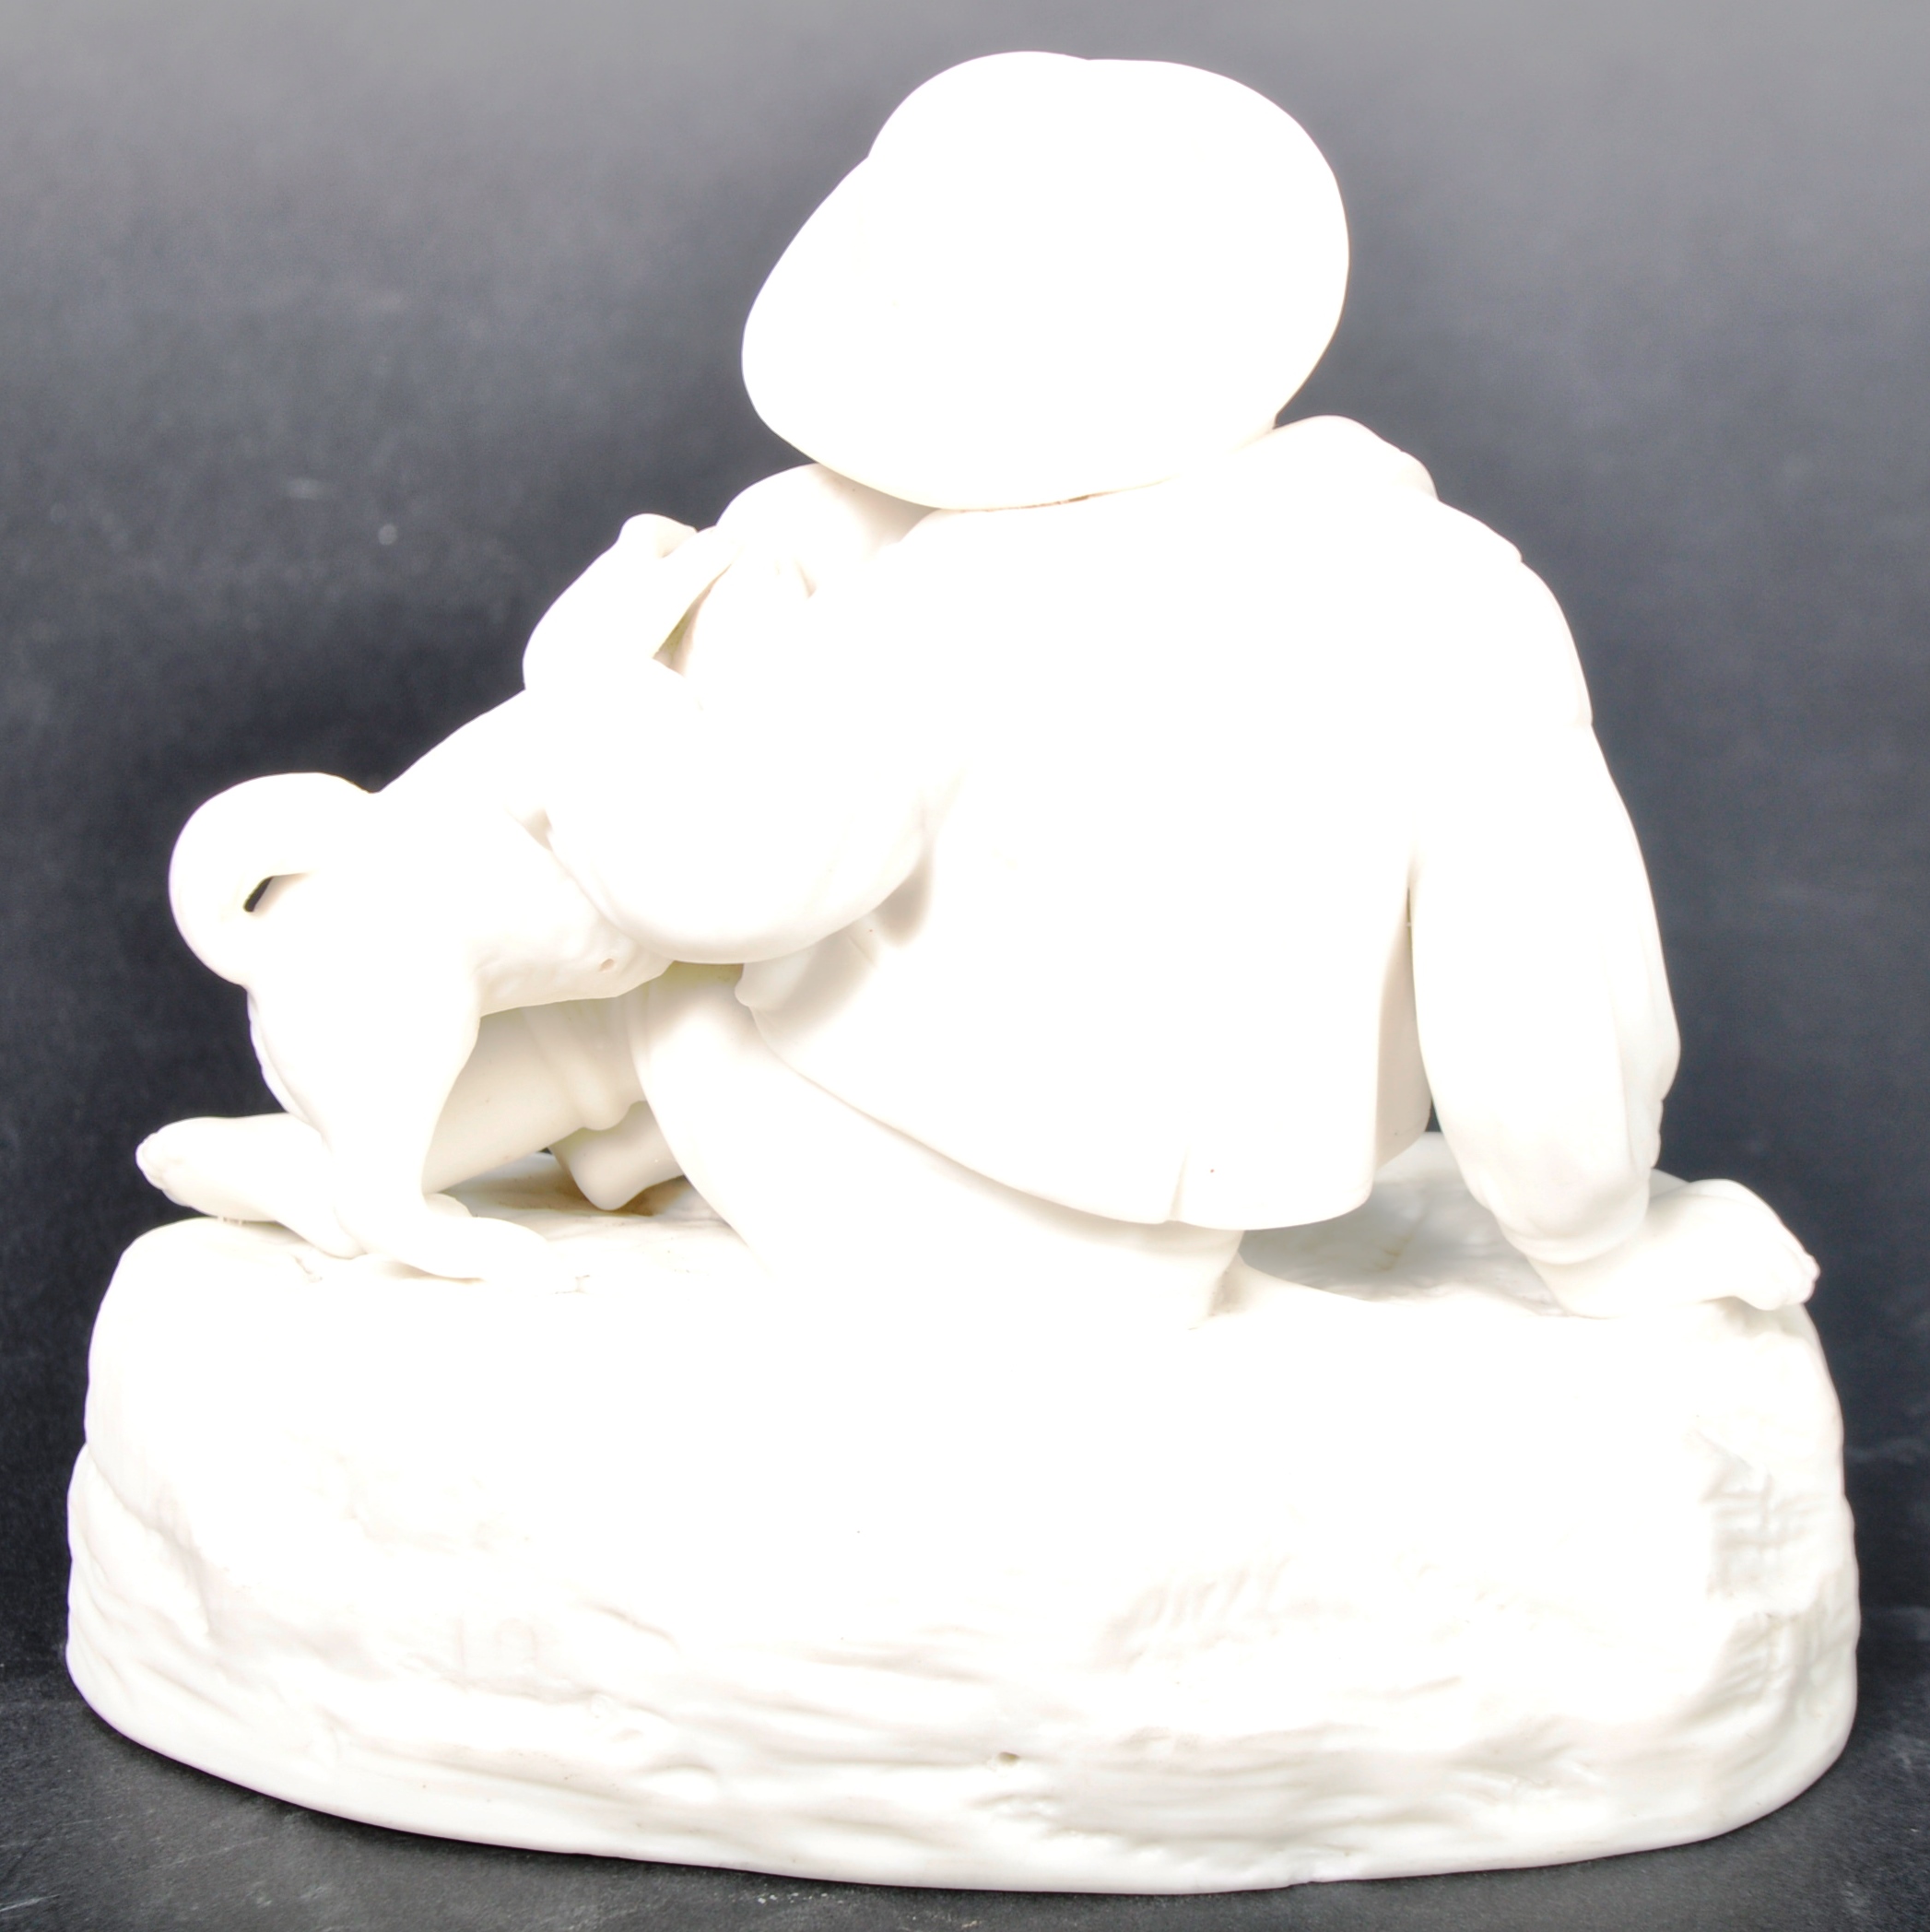 19TH CENTURY PARIAN WARE GROUP OF BOY AND DOG - Image 5 of 6